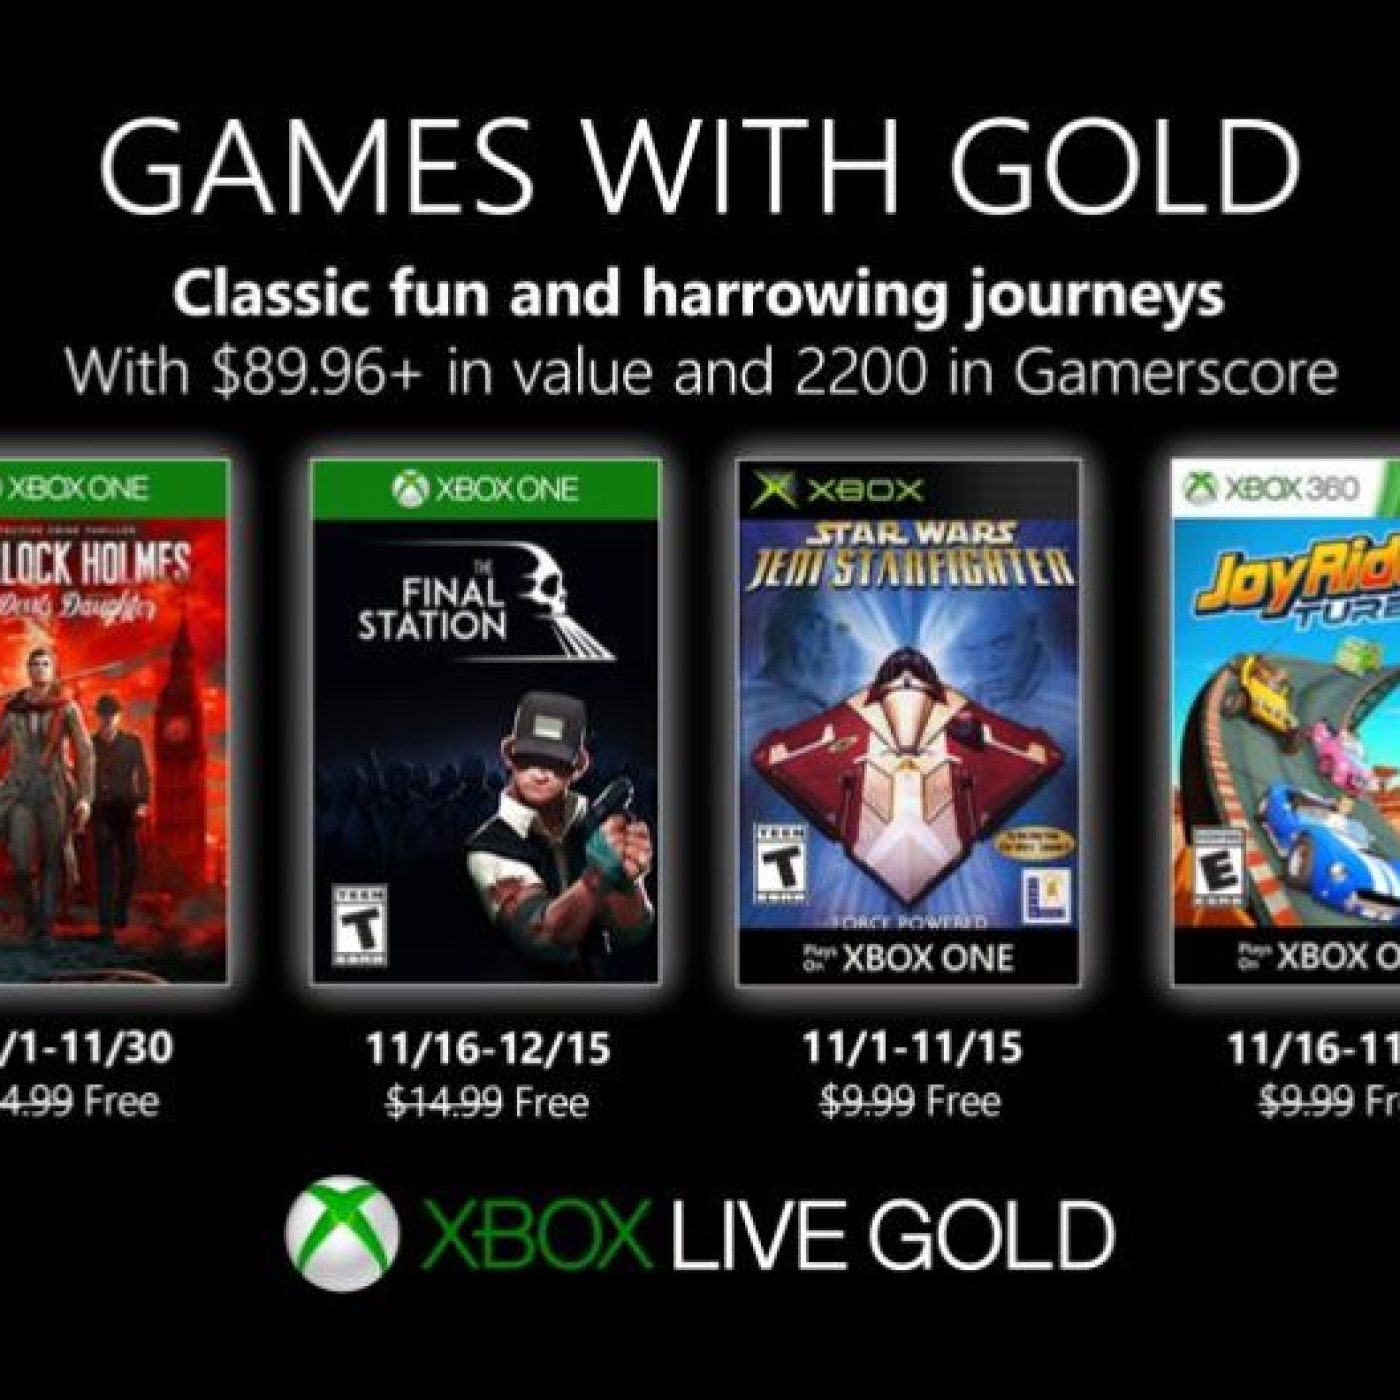 LEGO Indiana Jones Free on Xbox Games with Gold in November - Jedi News